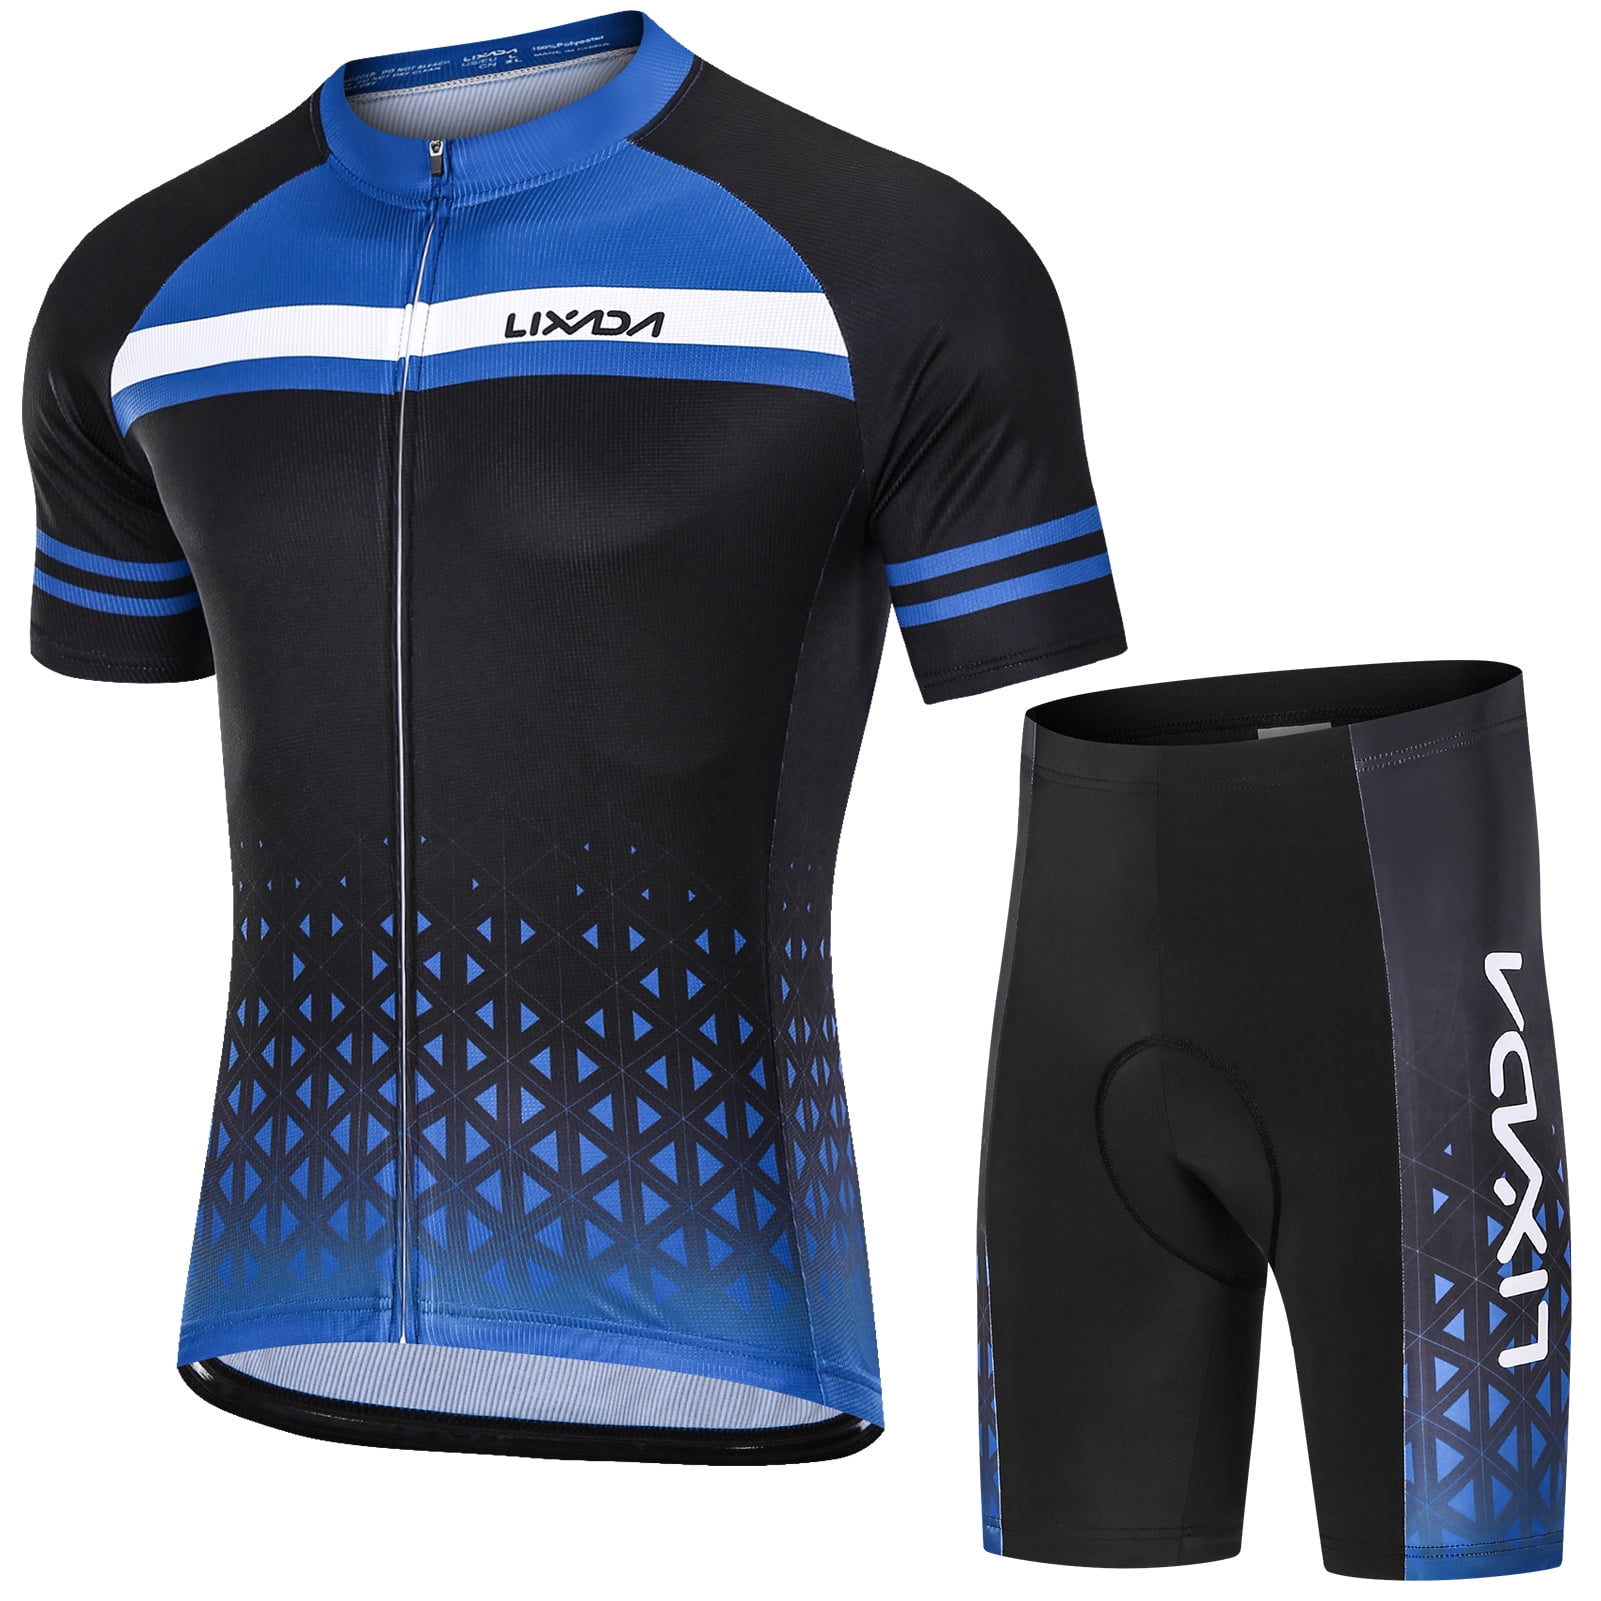 Details about   Men's Cycling  Short Sleeve Jersey Bike Tops Clothing Shirts Cool Breathable NEW 